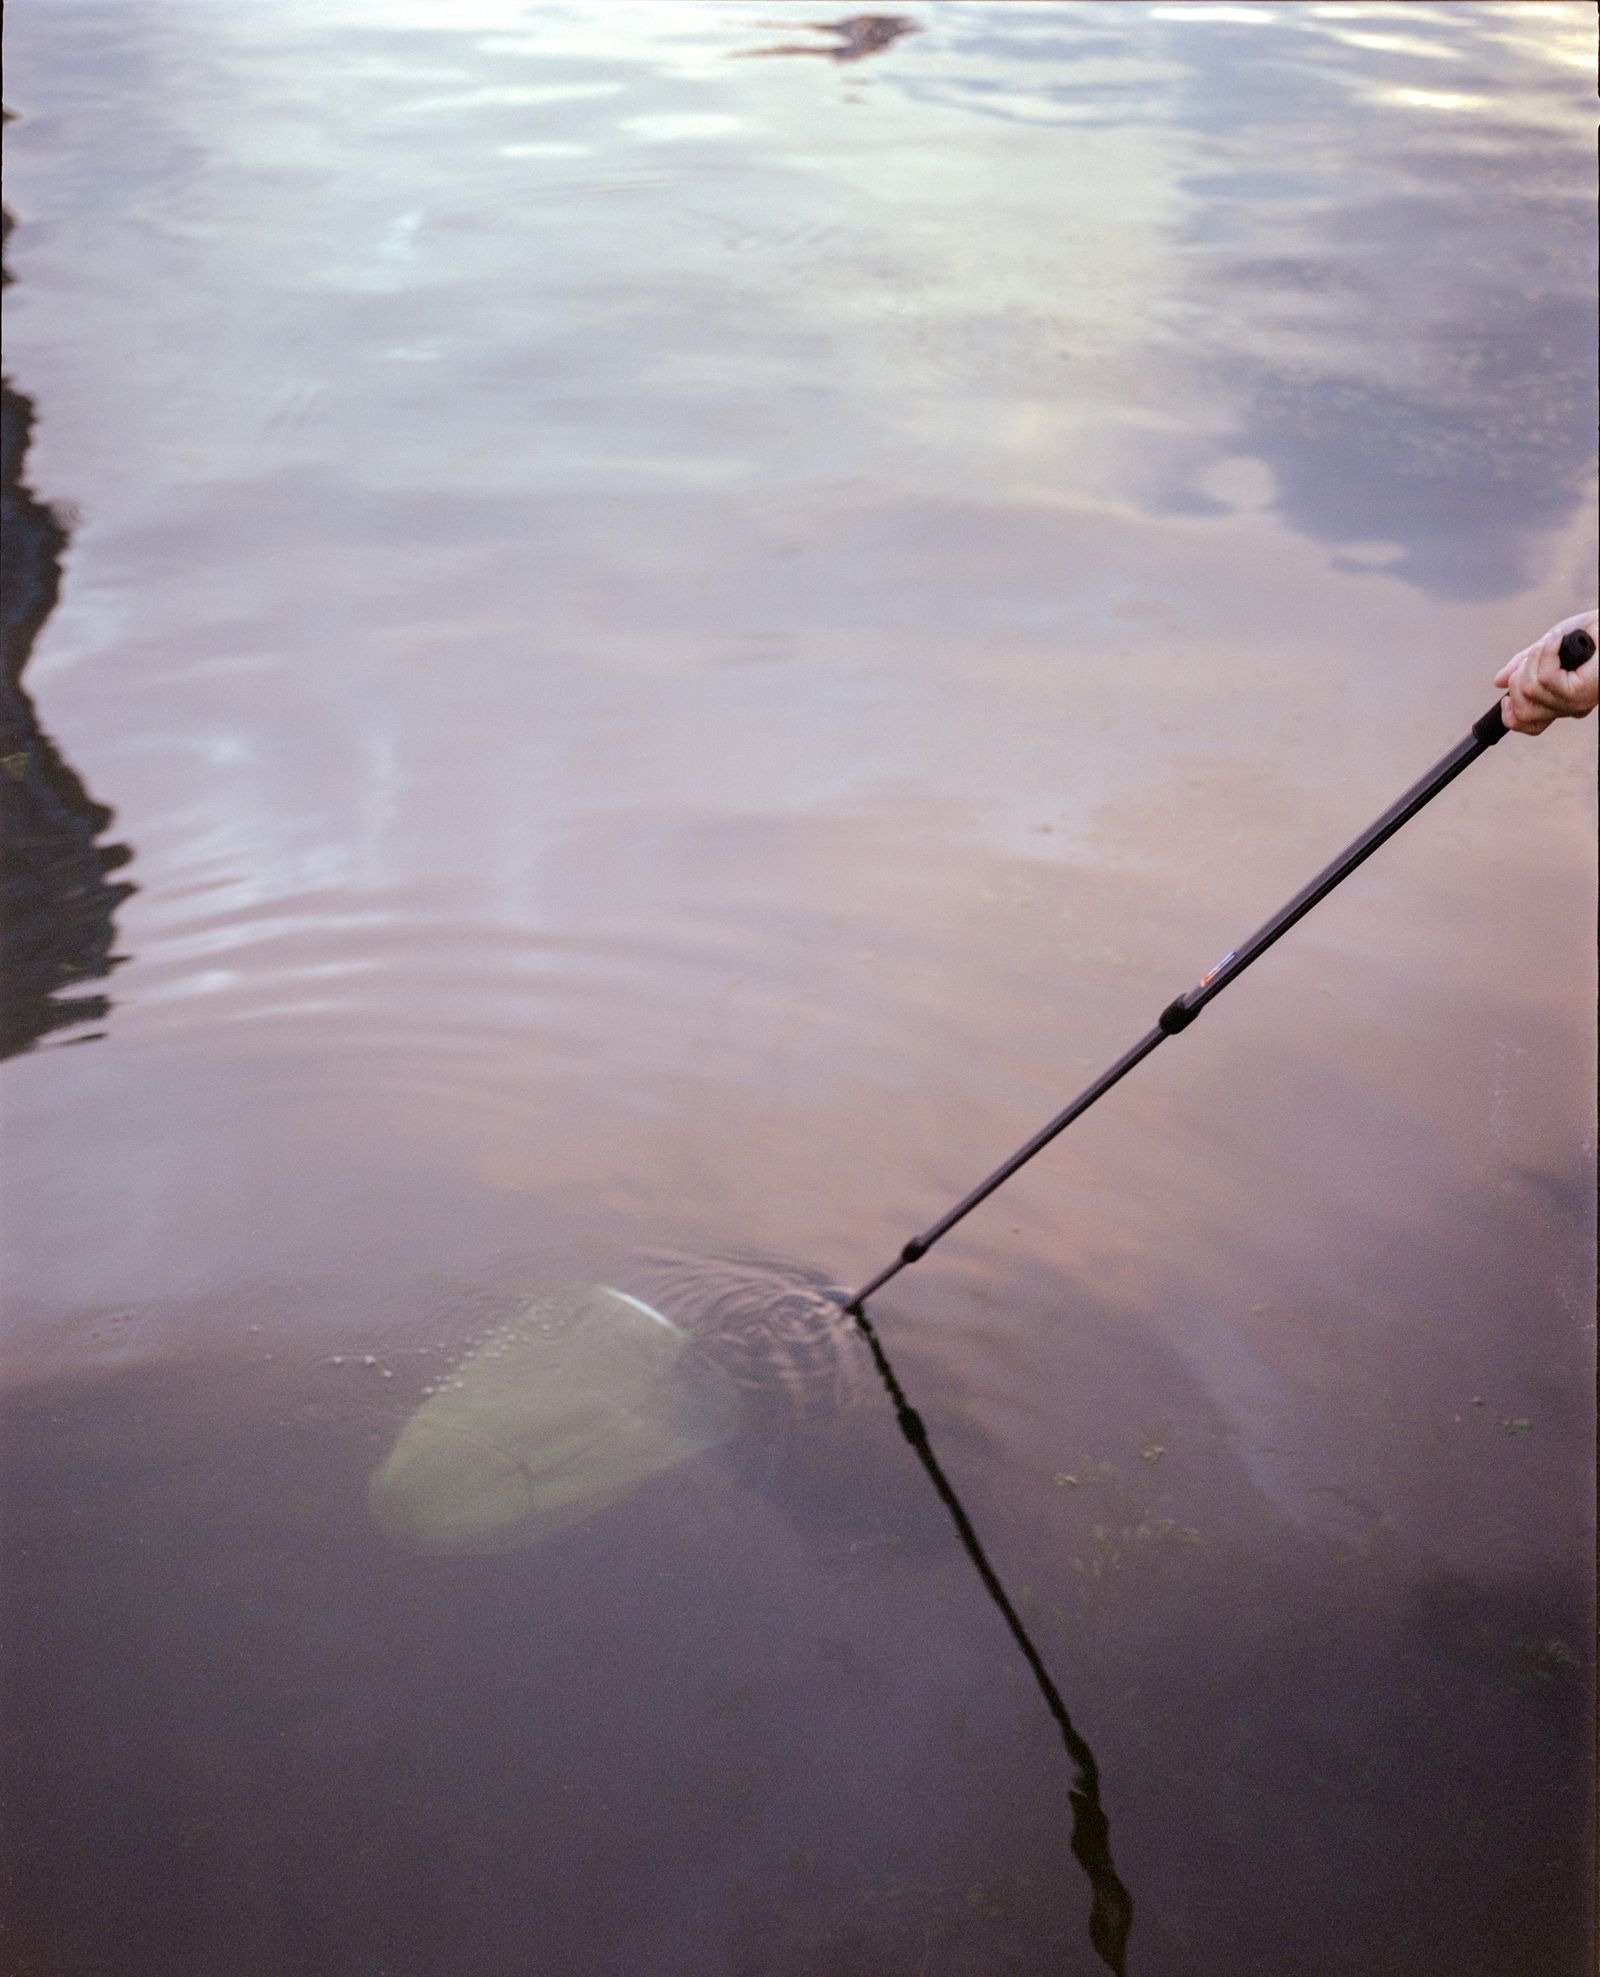 © Tianxi Wang - Image from the So long, and thanks for all the fish photography project